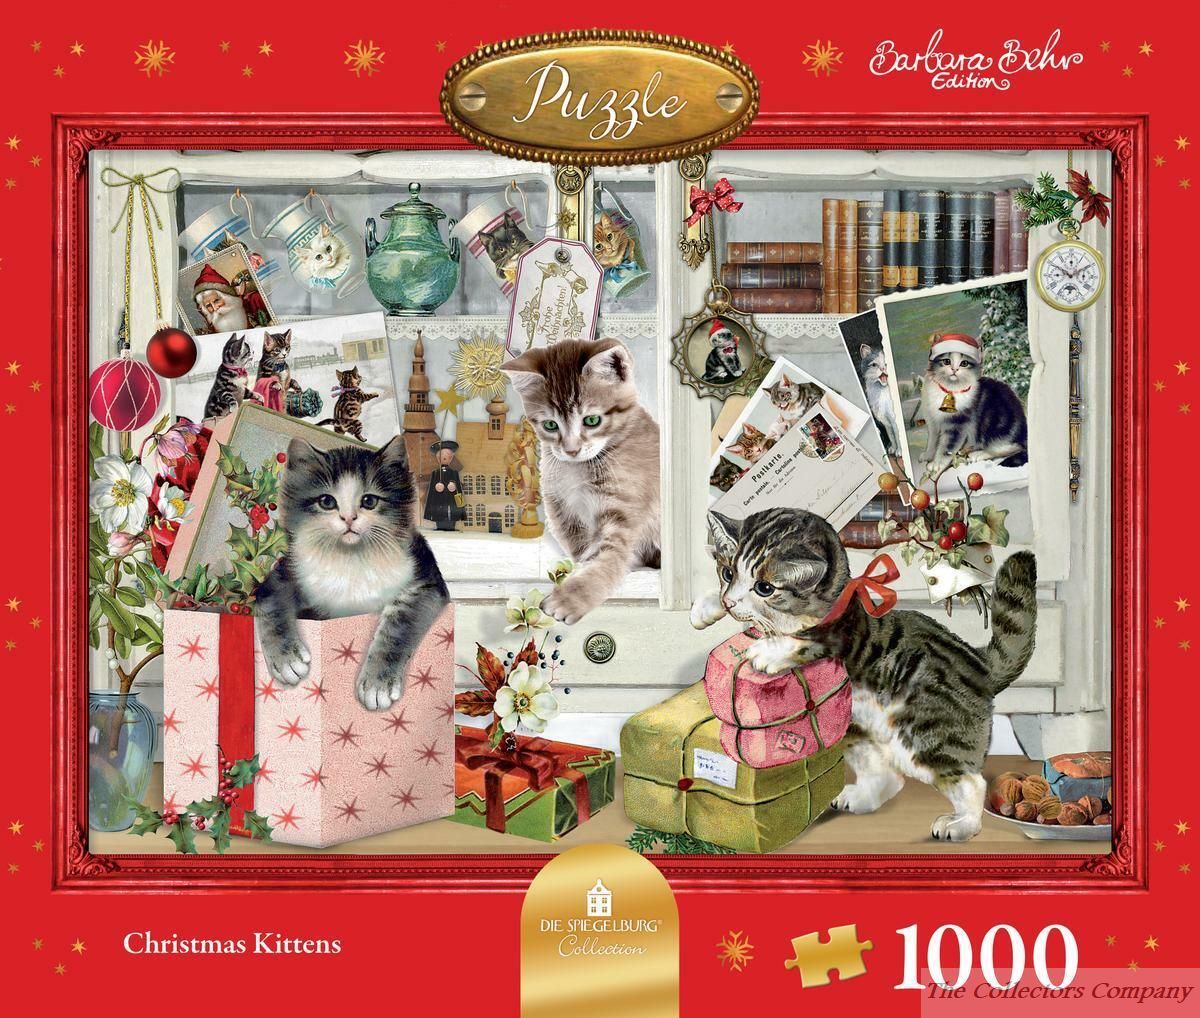 Jigsaw: Christmas Kitten Chaos by Coppenrath 14130